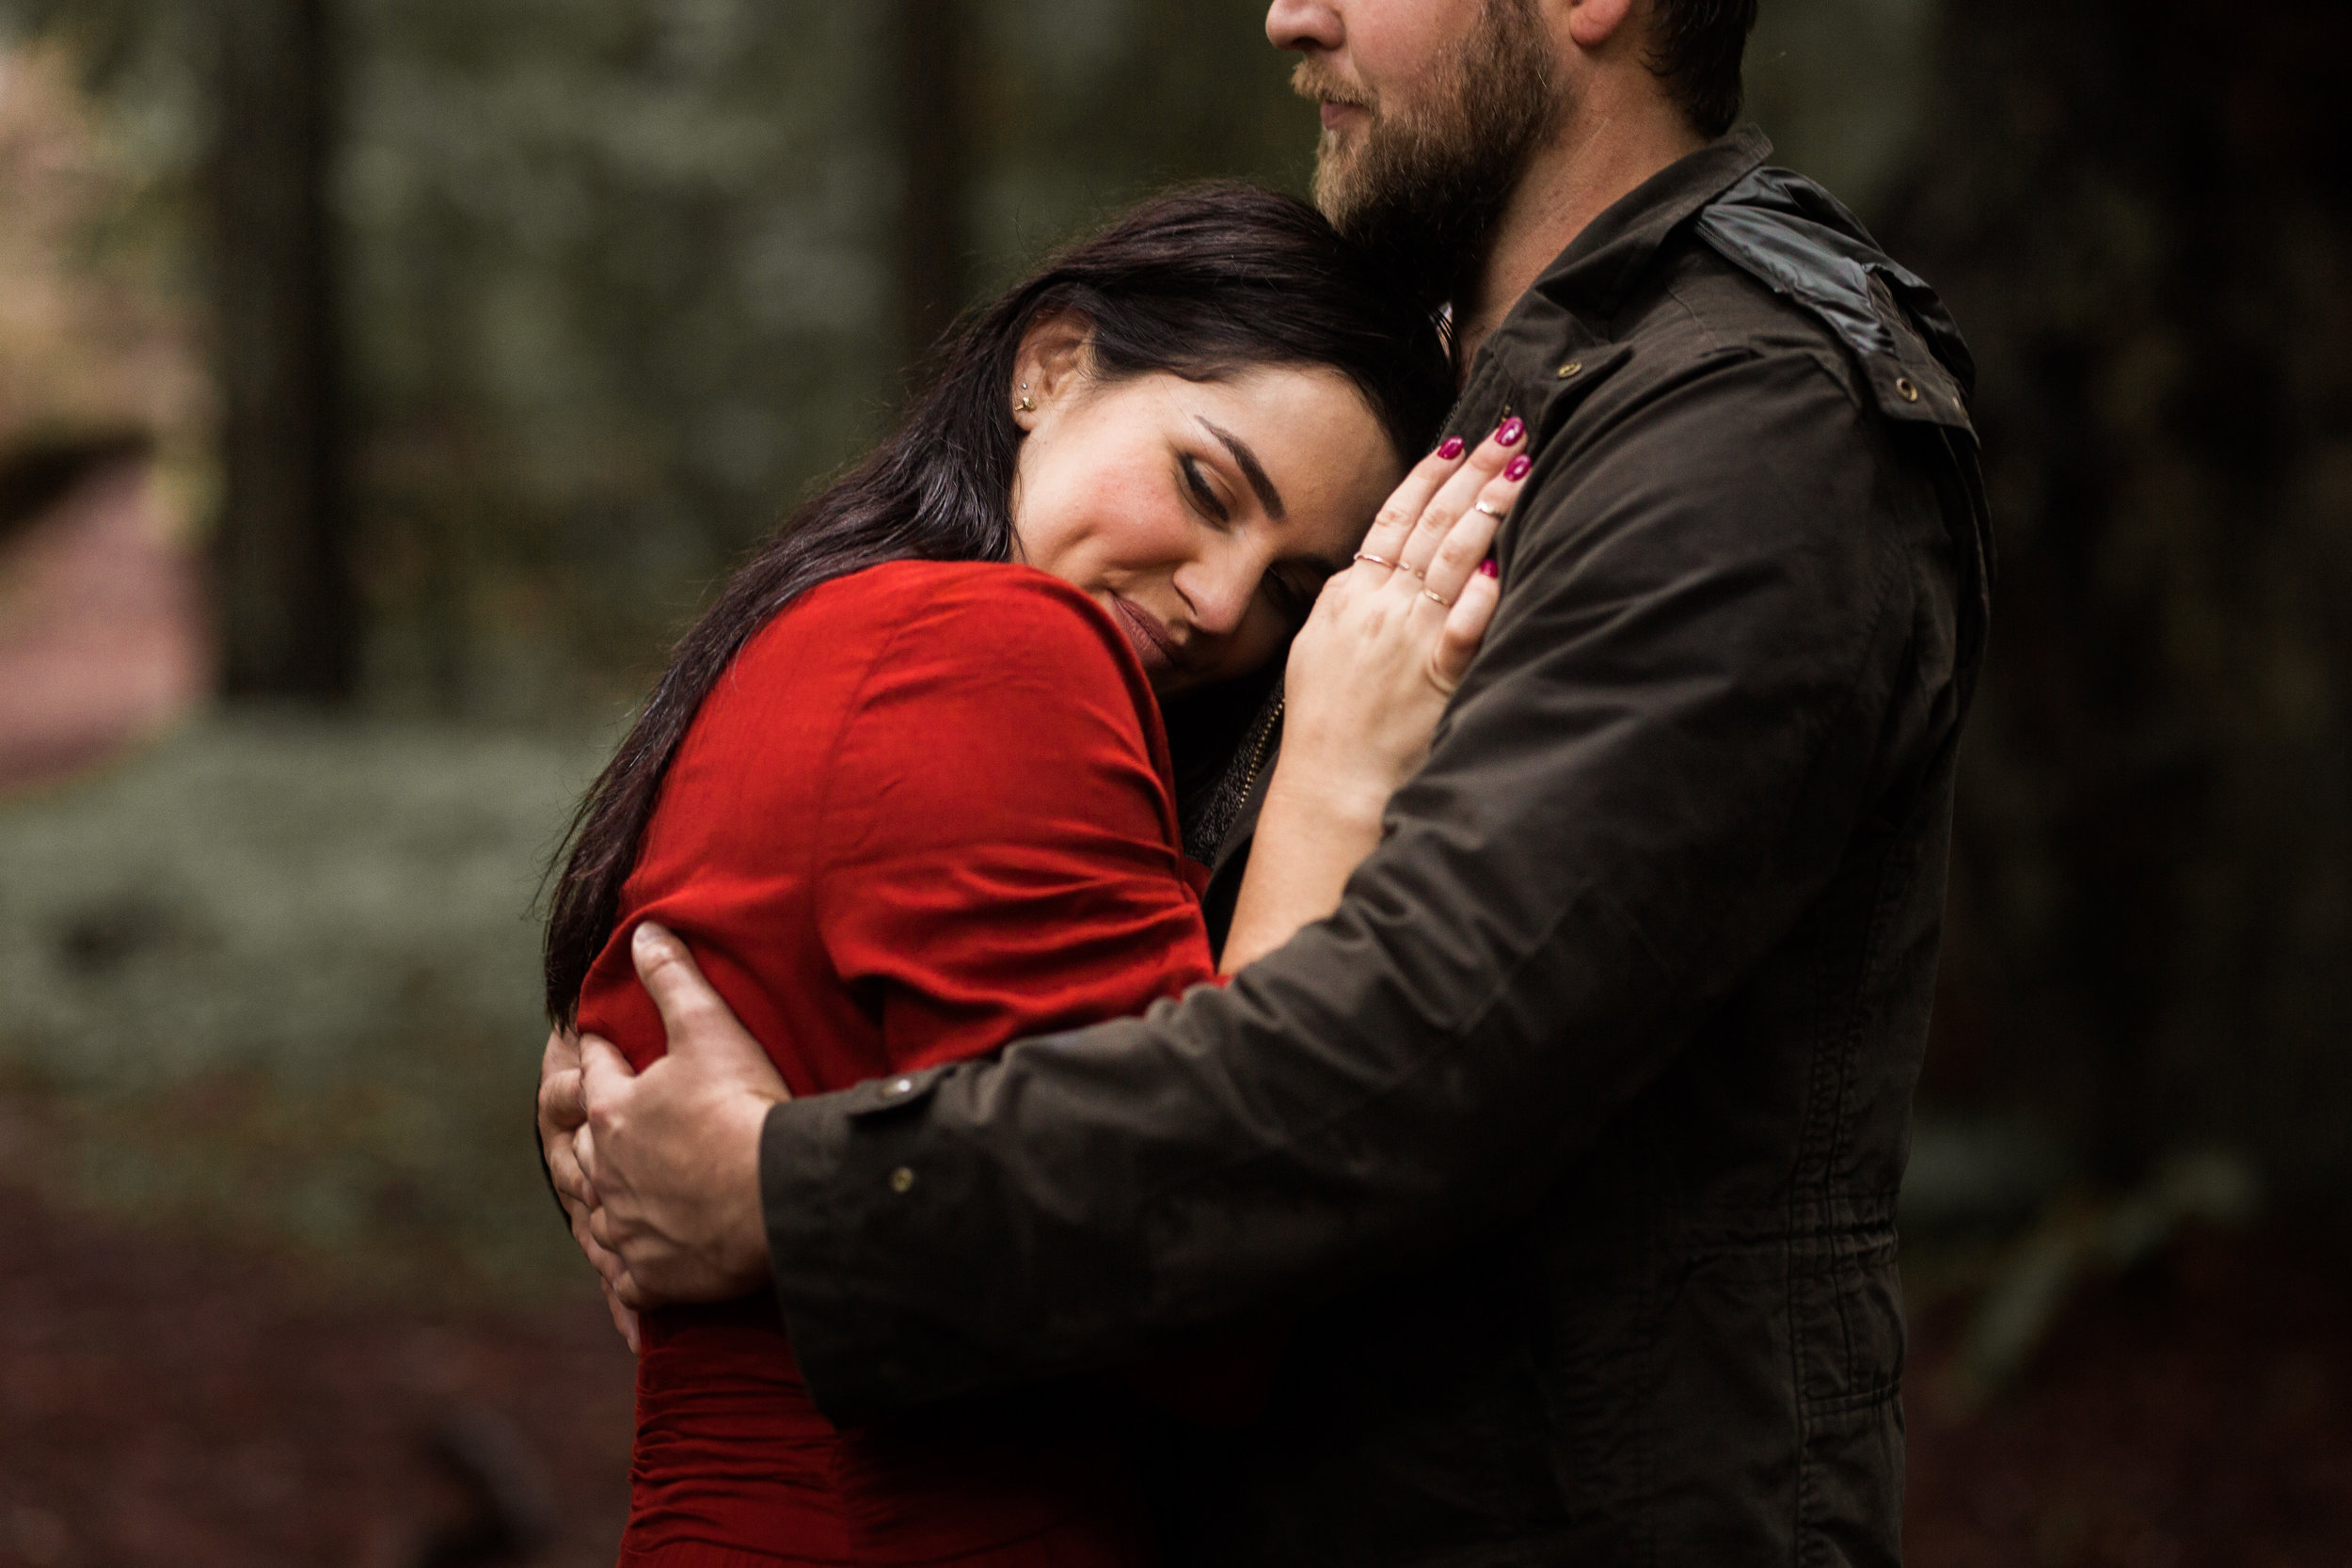 nicole-daacke-photography-redwoods-national-park-forest-rainy-foggy-adventure-engagement-session-humboldt-county-old-growth-redwood-tree-elopement-intimate-wedding-photographer-45.jpg